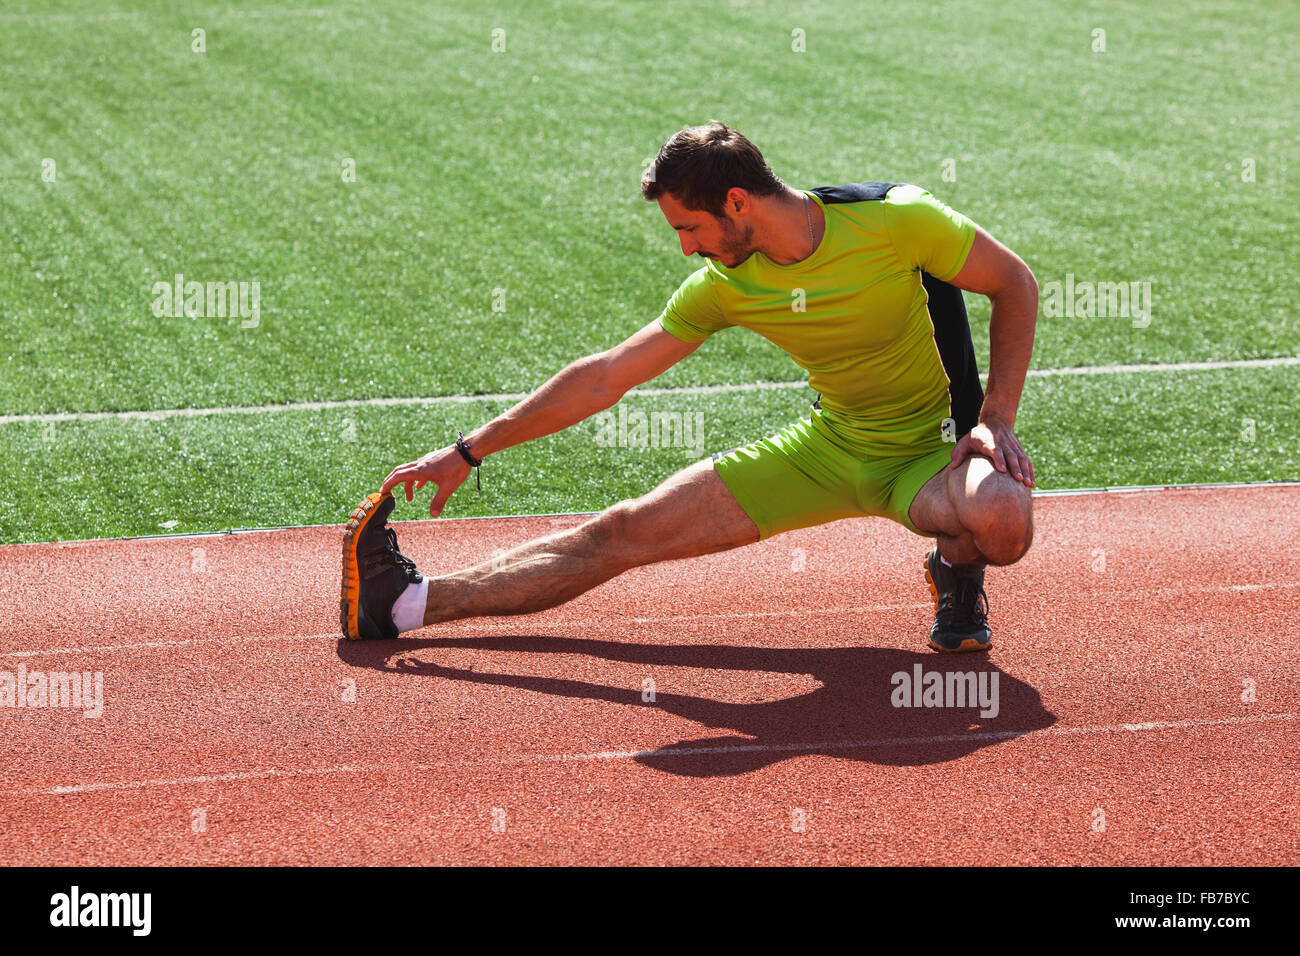 Full length of track and field athlete warming up on race track Stock Photo